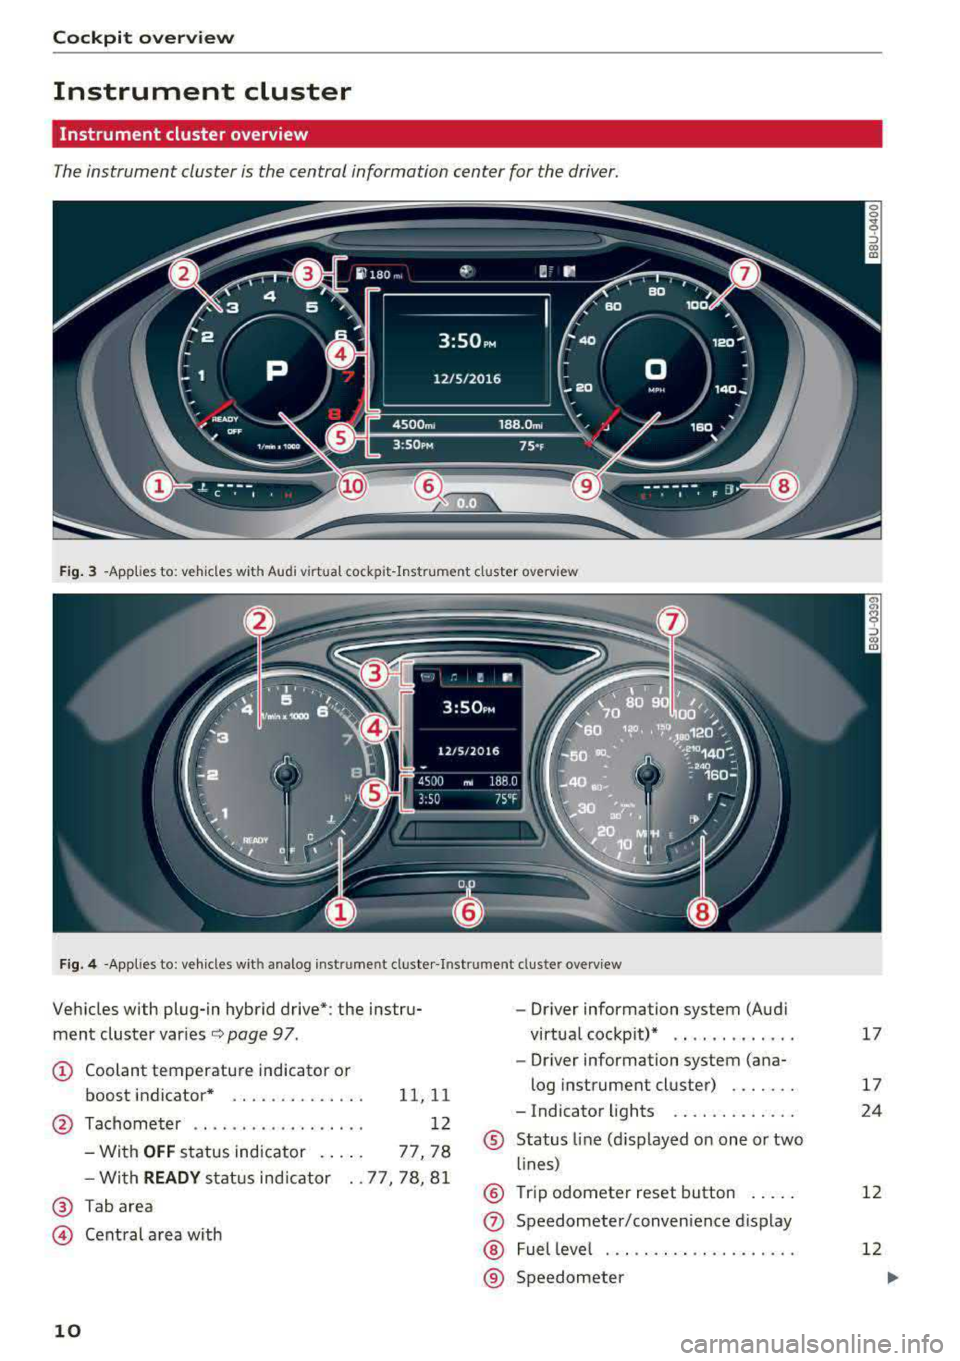 AUDI A3 SEDAN 2017 User Guide Cockpit  overview 
Instrument  cluster 
Instrument  cluster  overview 
The instrument  cluster is the  central  information  center  for  the  driver. 
F ig . 3 -App lies  to:  vehicles  wi th Aud i v